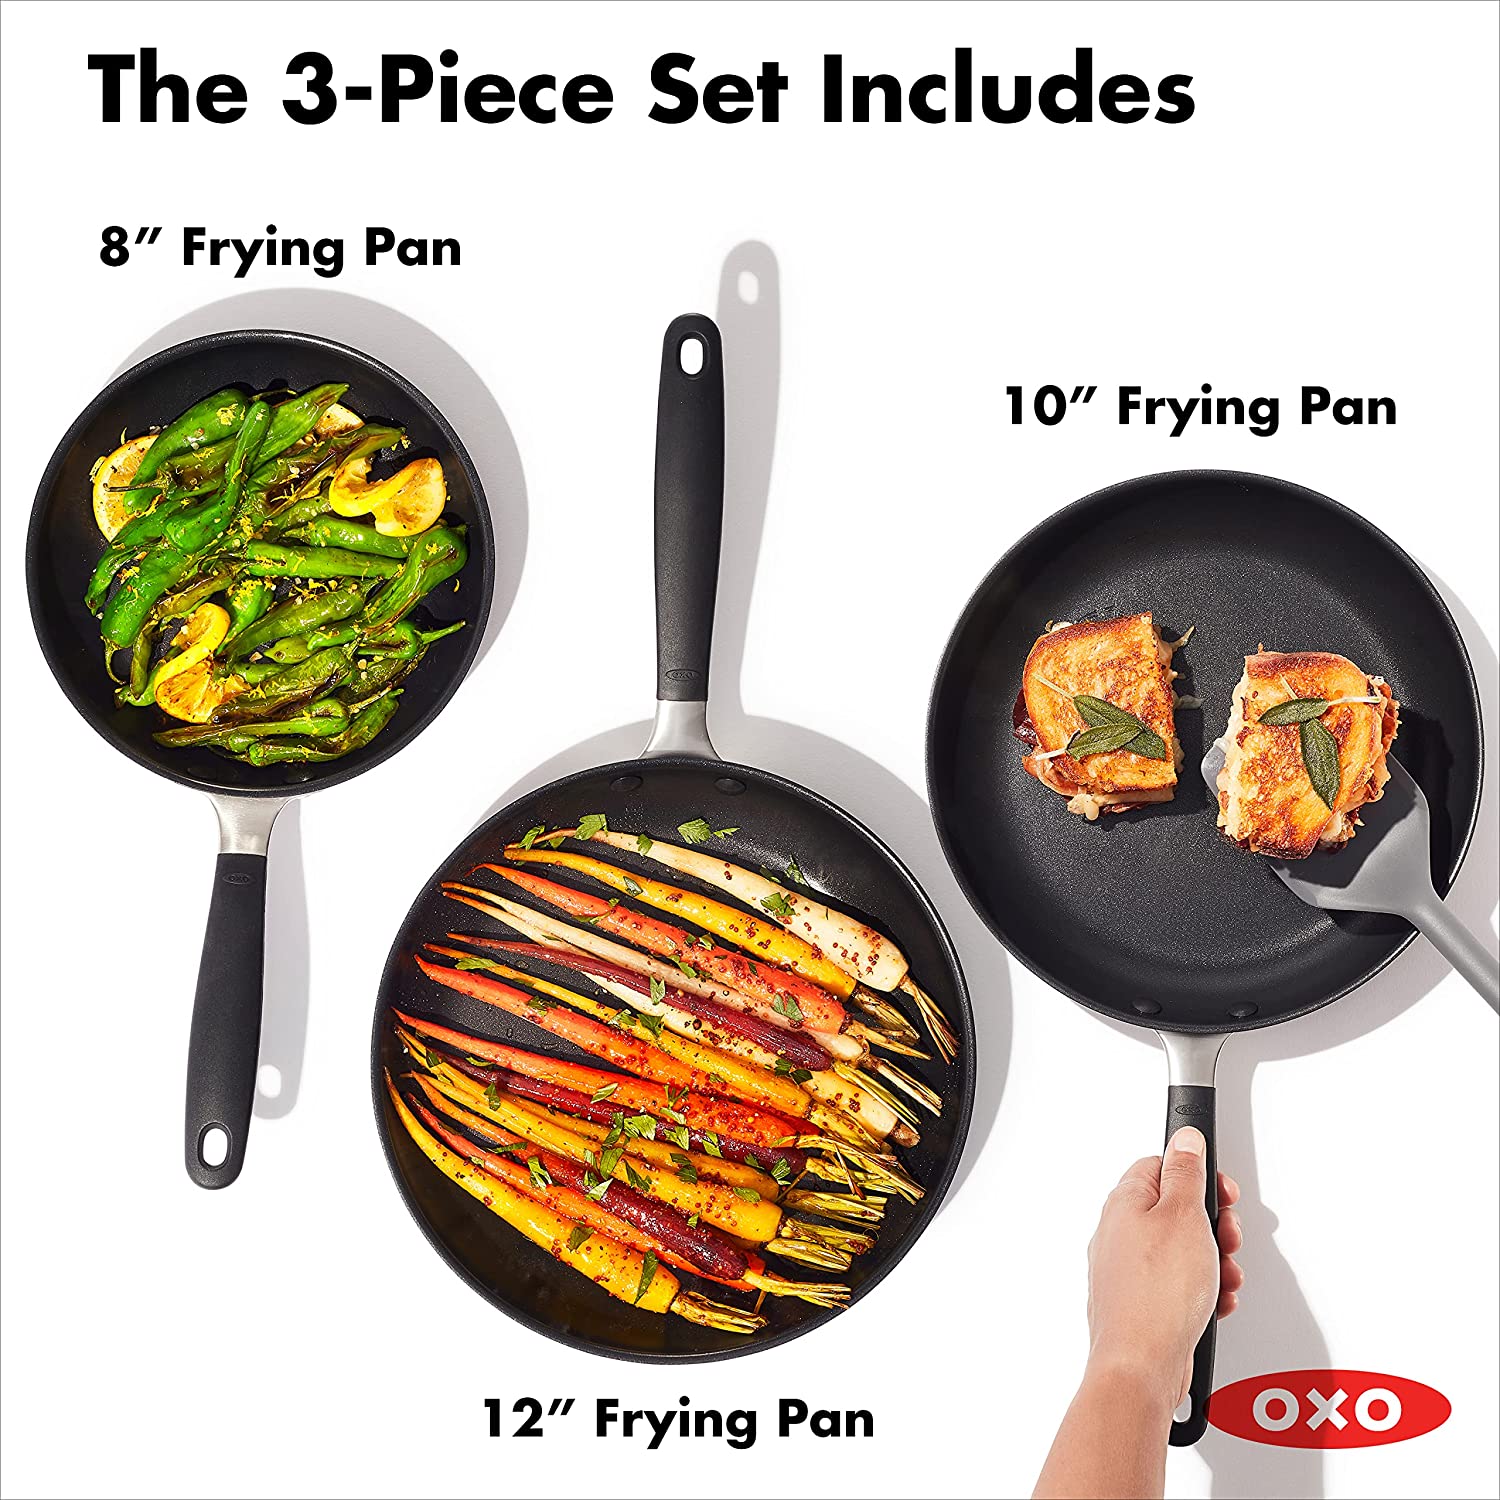 which pans are best for frying?